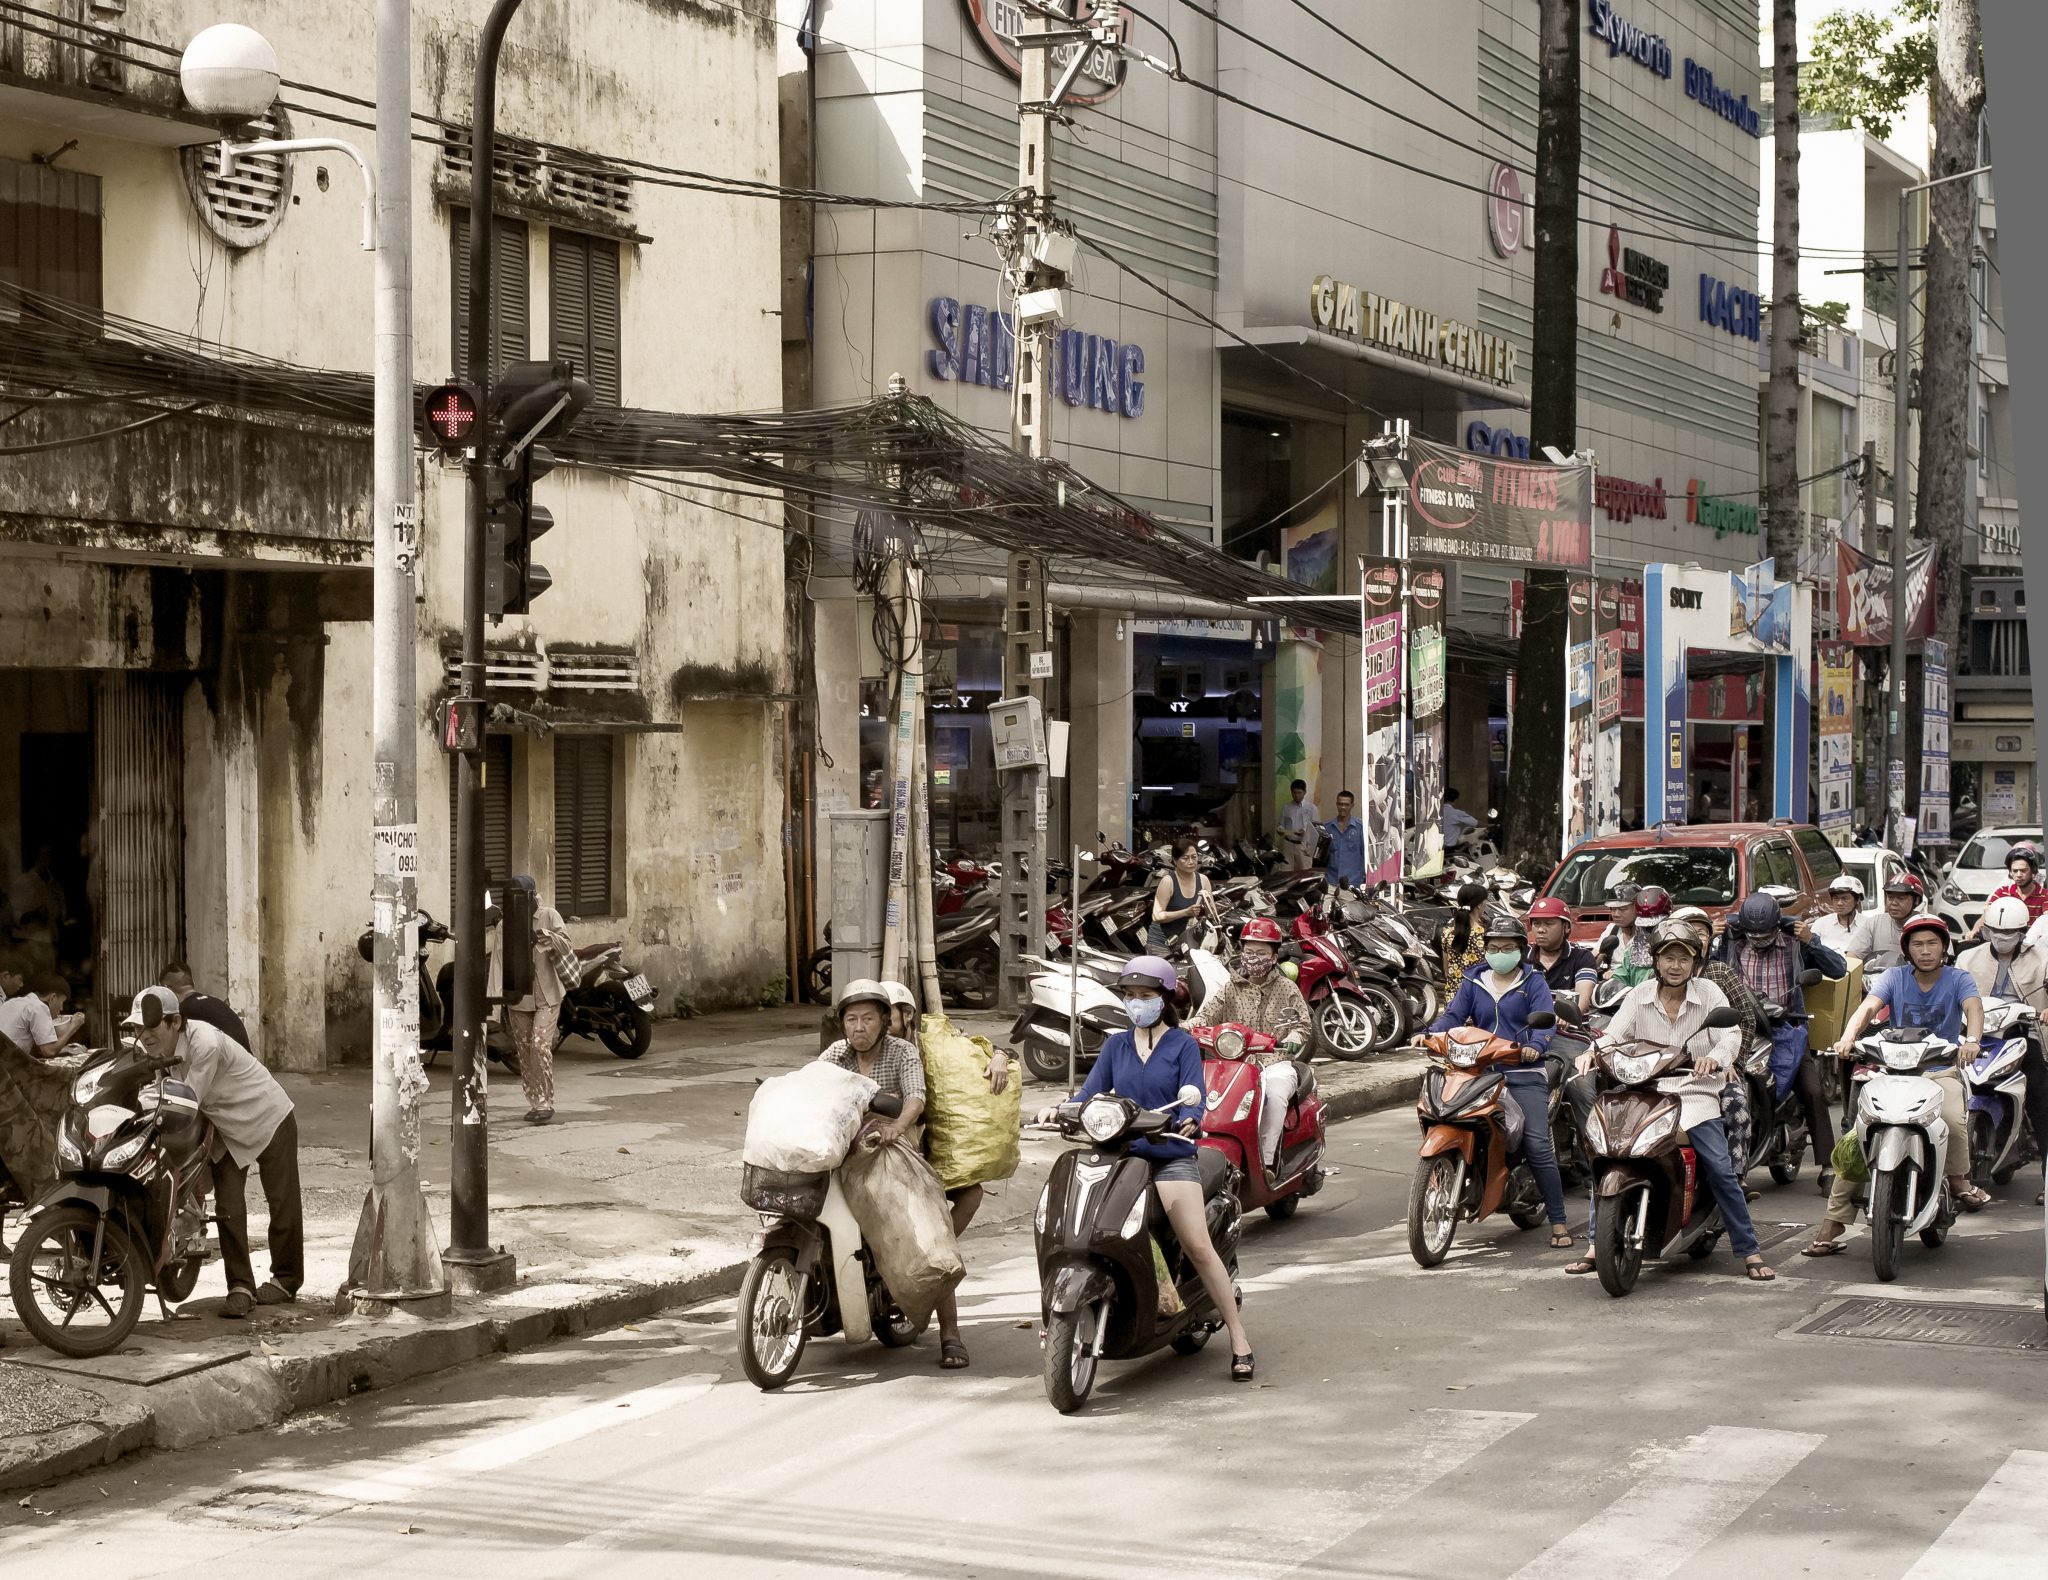 How to understand the prospects for labor reform in Vietnam